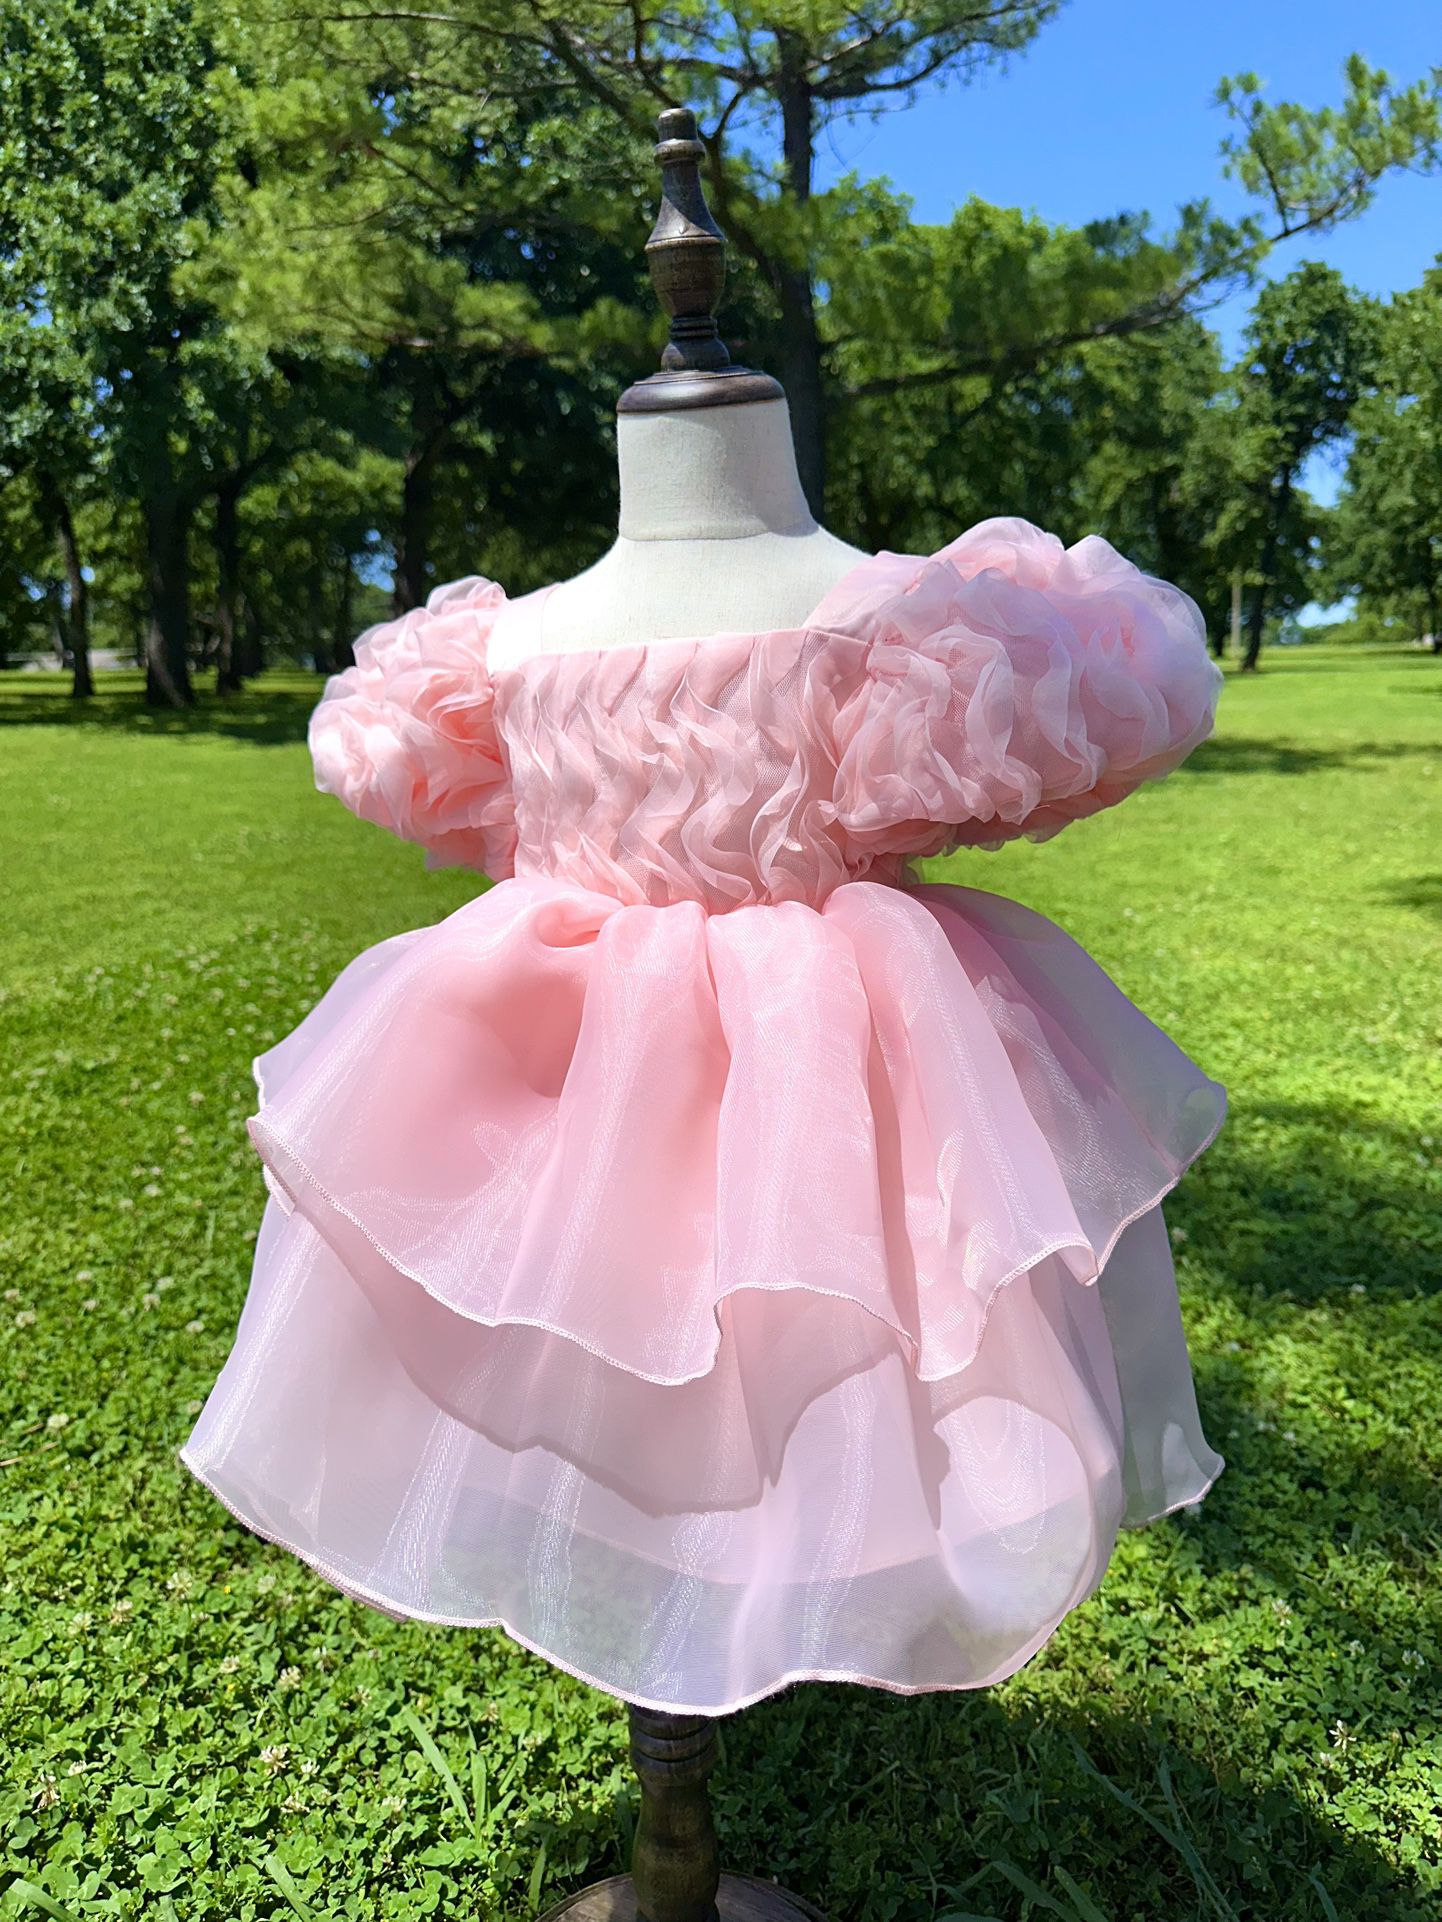 Puff Sleeves Pink Dress Size 3-4T 